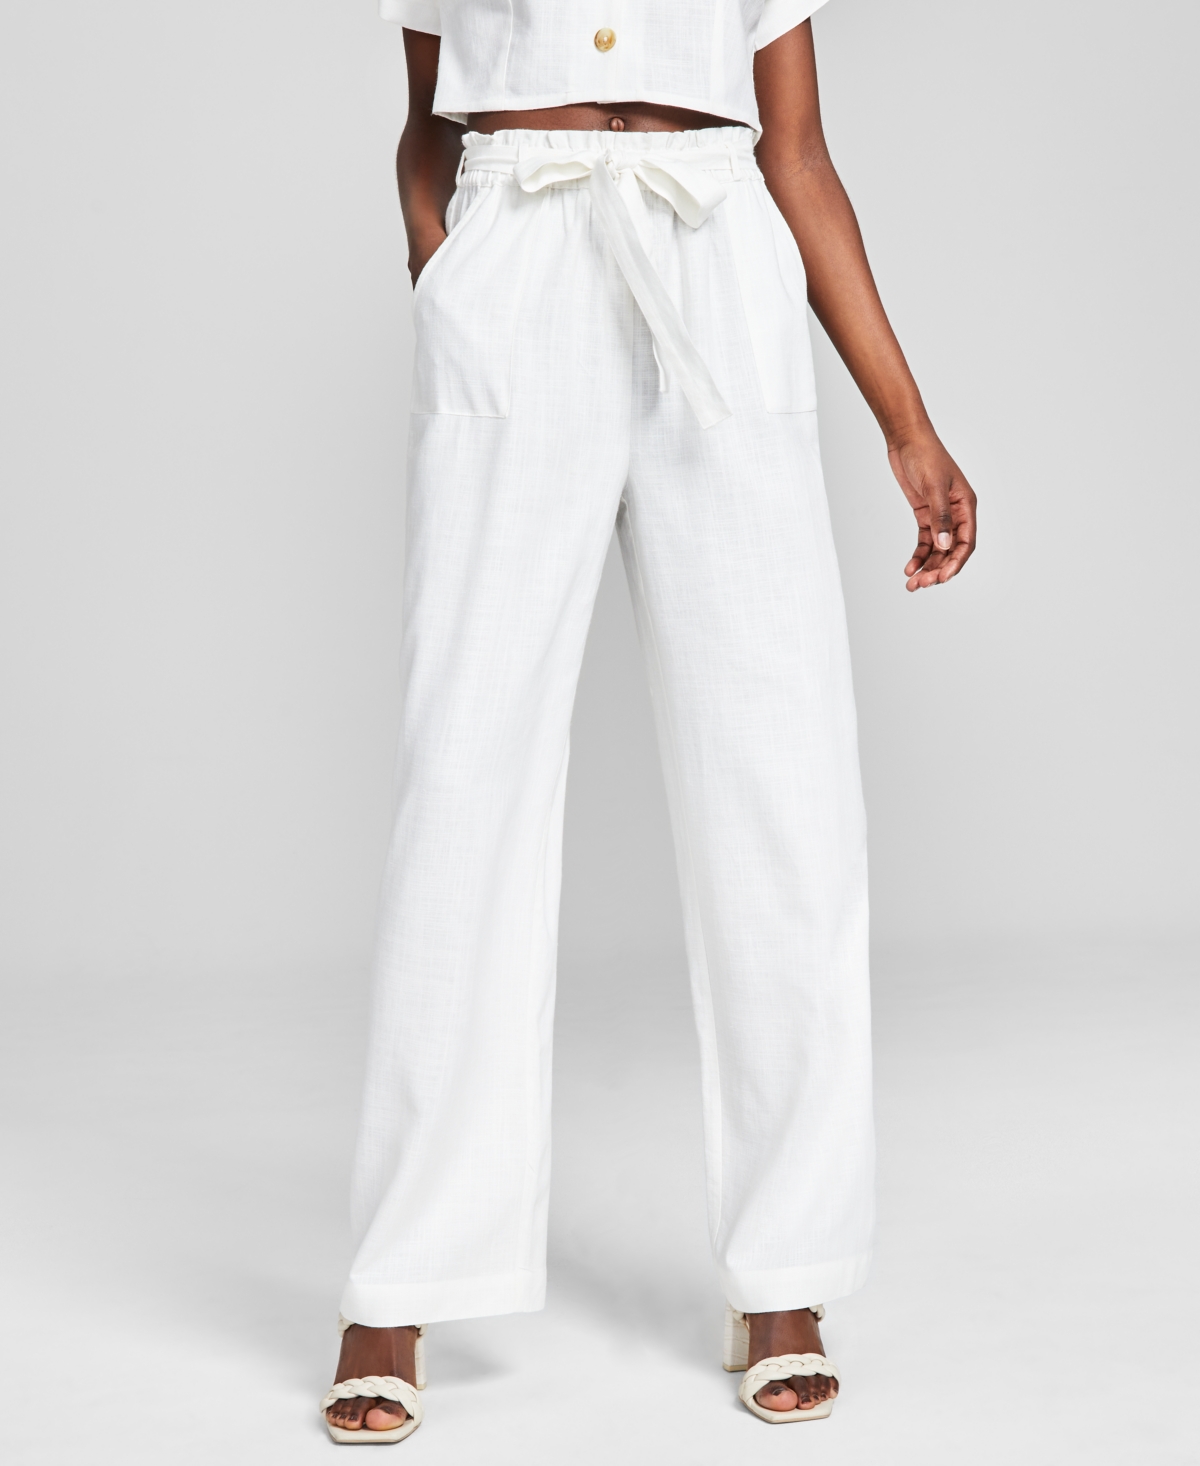 And Now This Women's Linen Blend Paperbag Pants In White